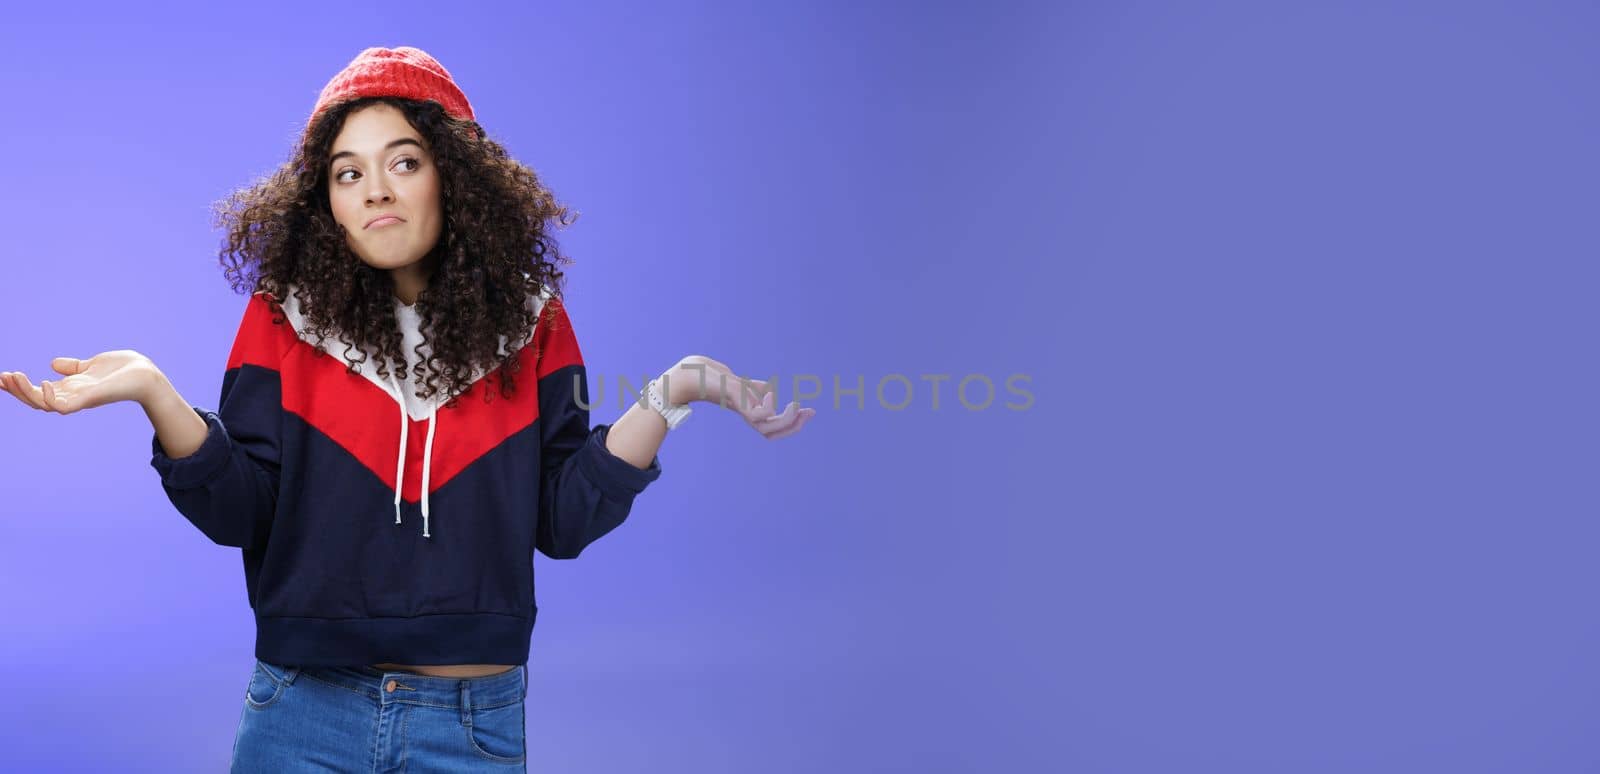 Not getting clue. Cute silly woman with curly hair shrugging with pursed lips and unbothered expression holding hands sideways looking right being unaware and confused, uncertain what answer by Benzoix